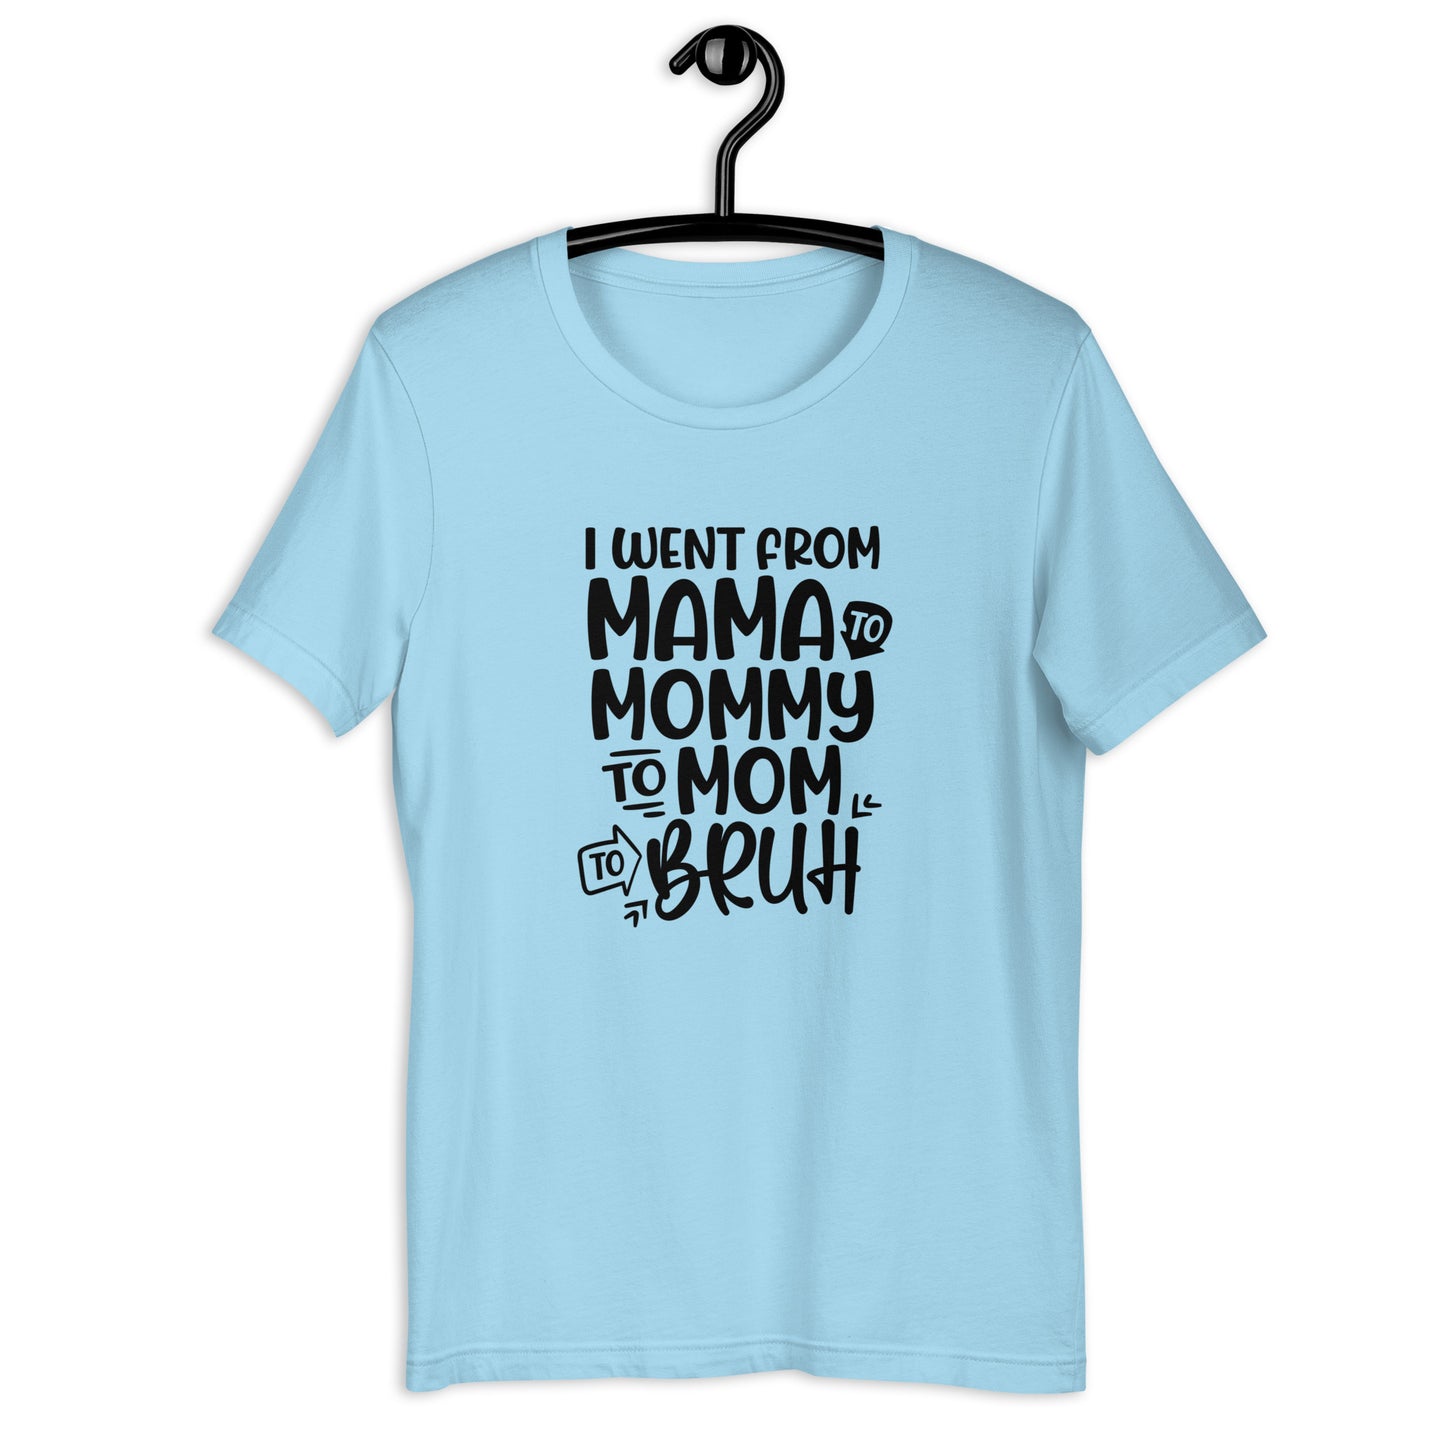 From Mommy to Bruh / Motherhood T-shirt